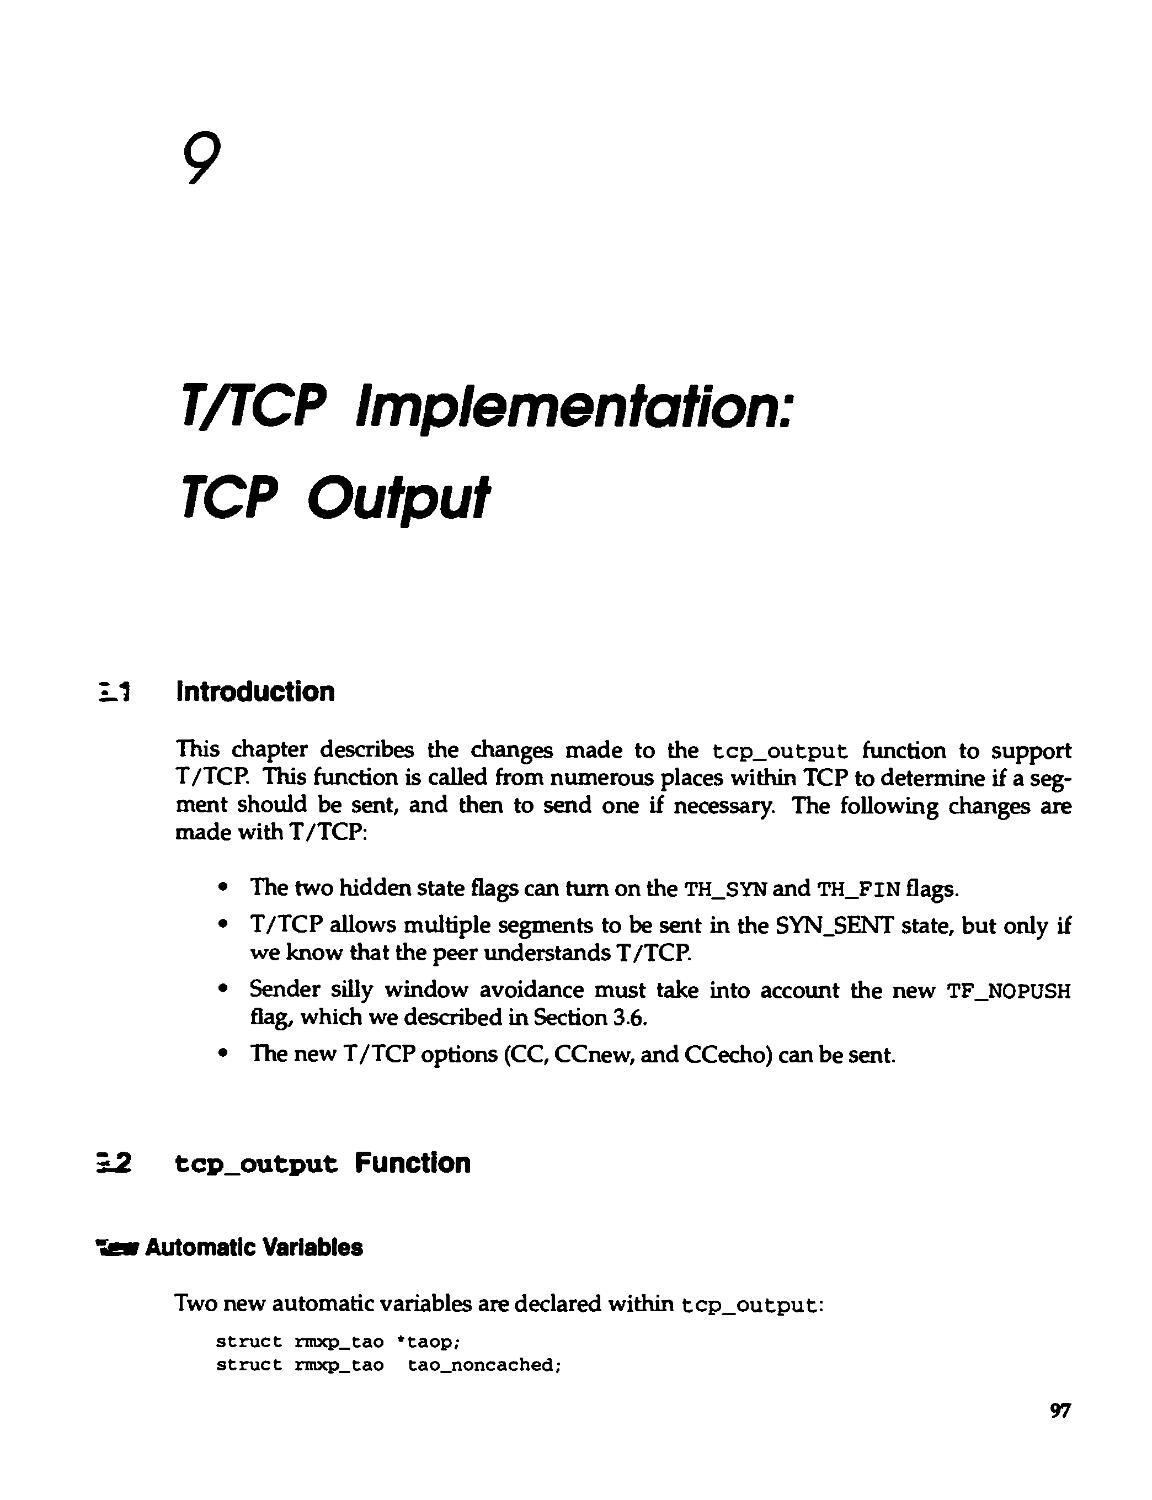 Chapter 9. T/TCP implementation: TCP Output
9.2 tcp_output Function